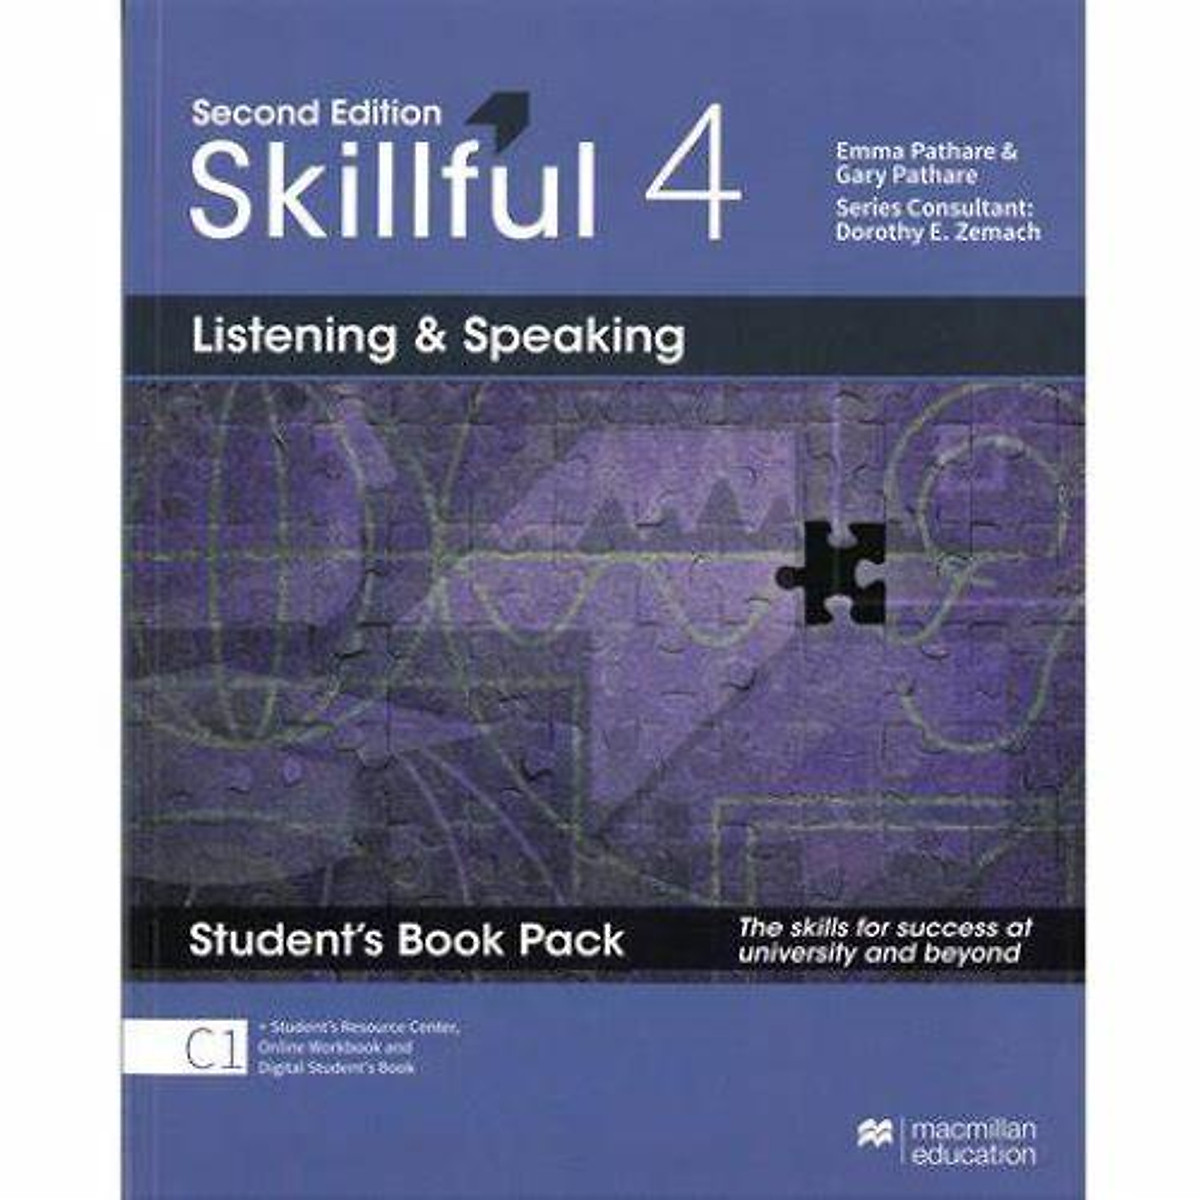 Skillful Second Edition Listening &Speaking 4 Student's Book + Digital Student's Book Pack